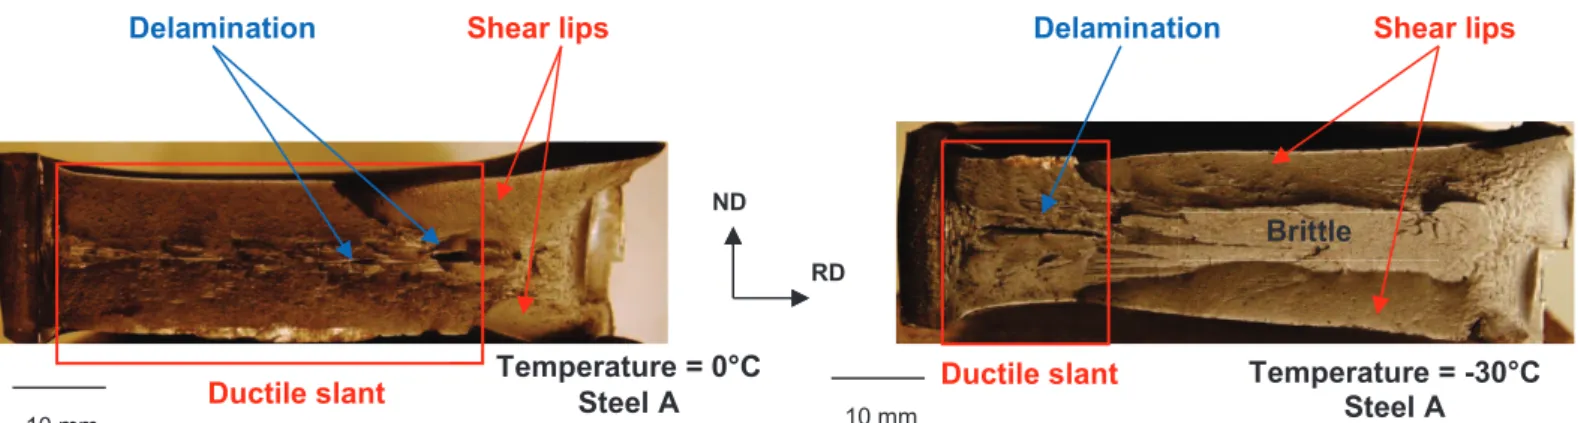 Figure II-14: Observation of ductile slant and shear lips after drop weight tear tests 